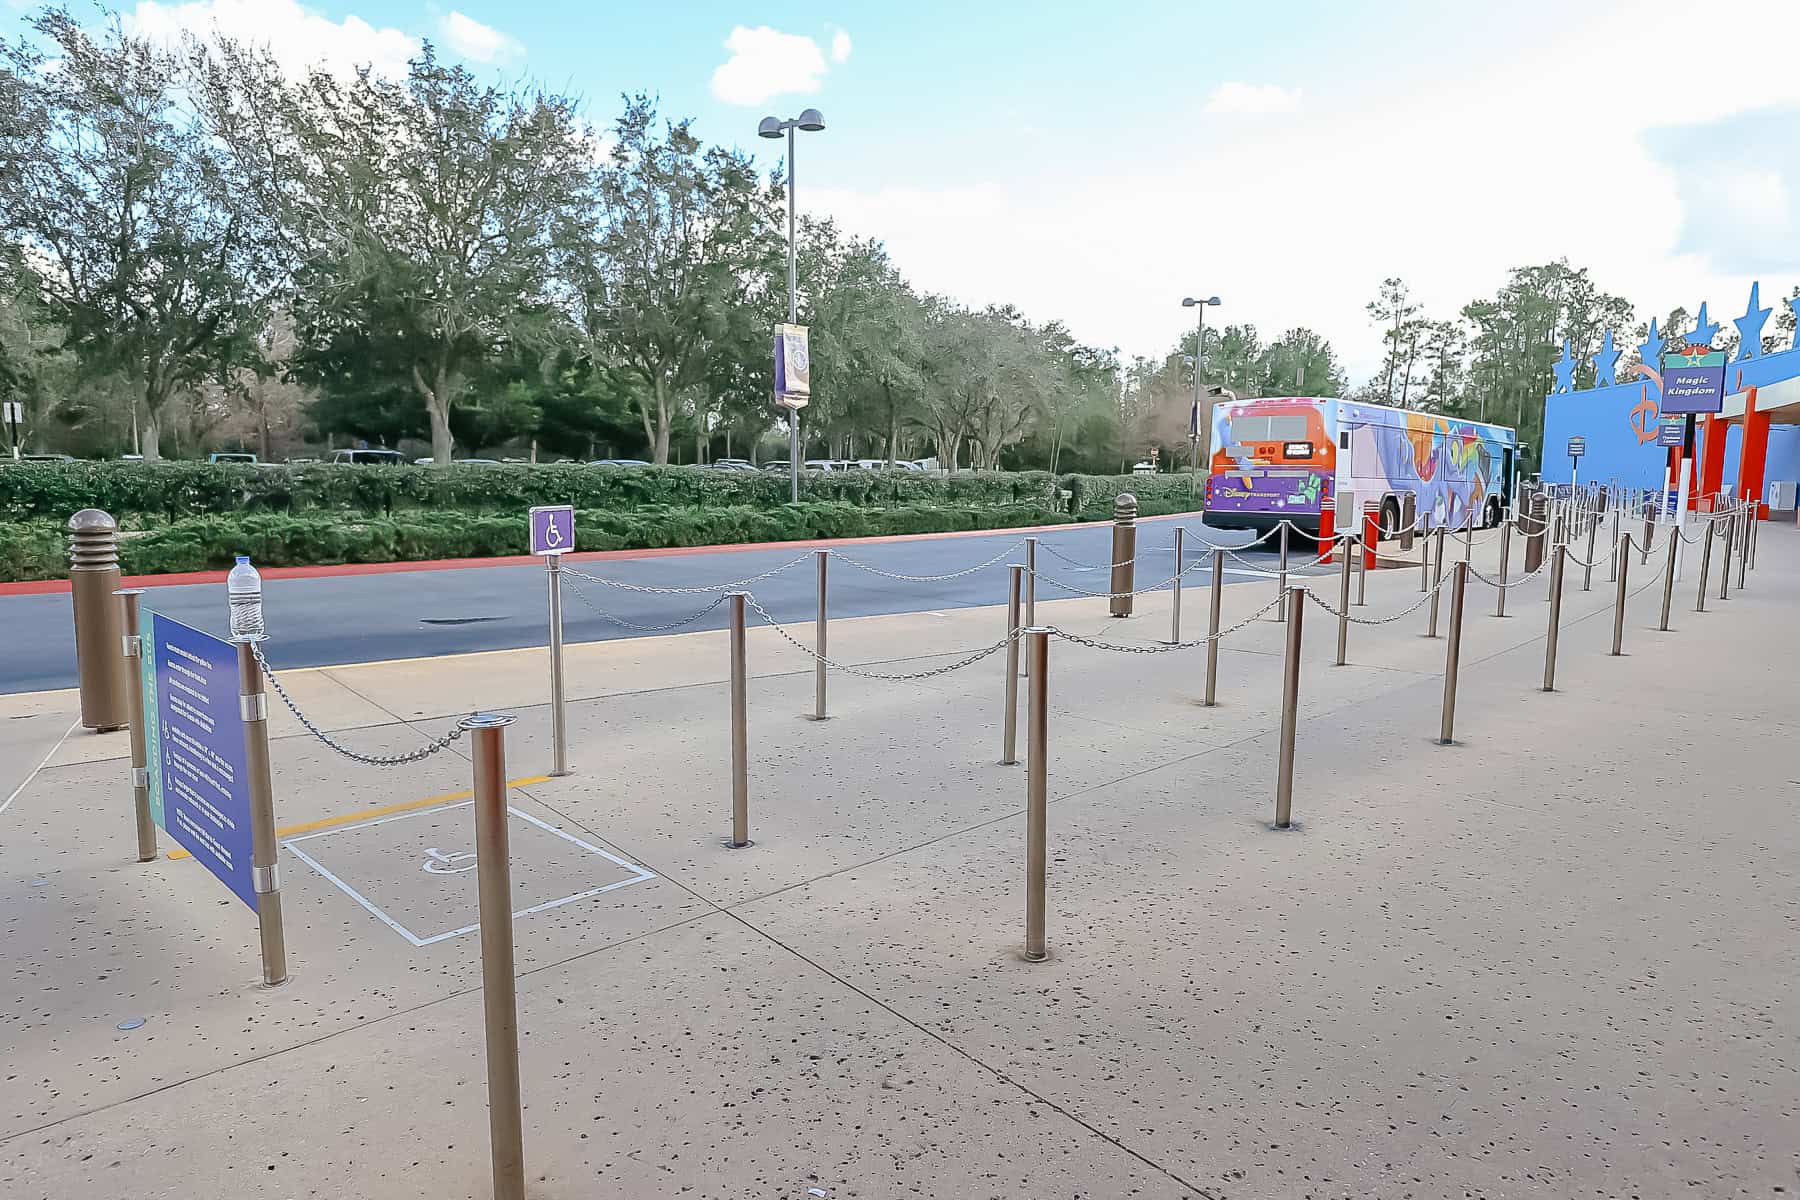 All-Star Movies bus stop 